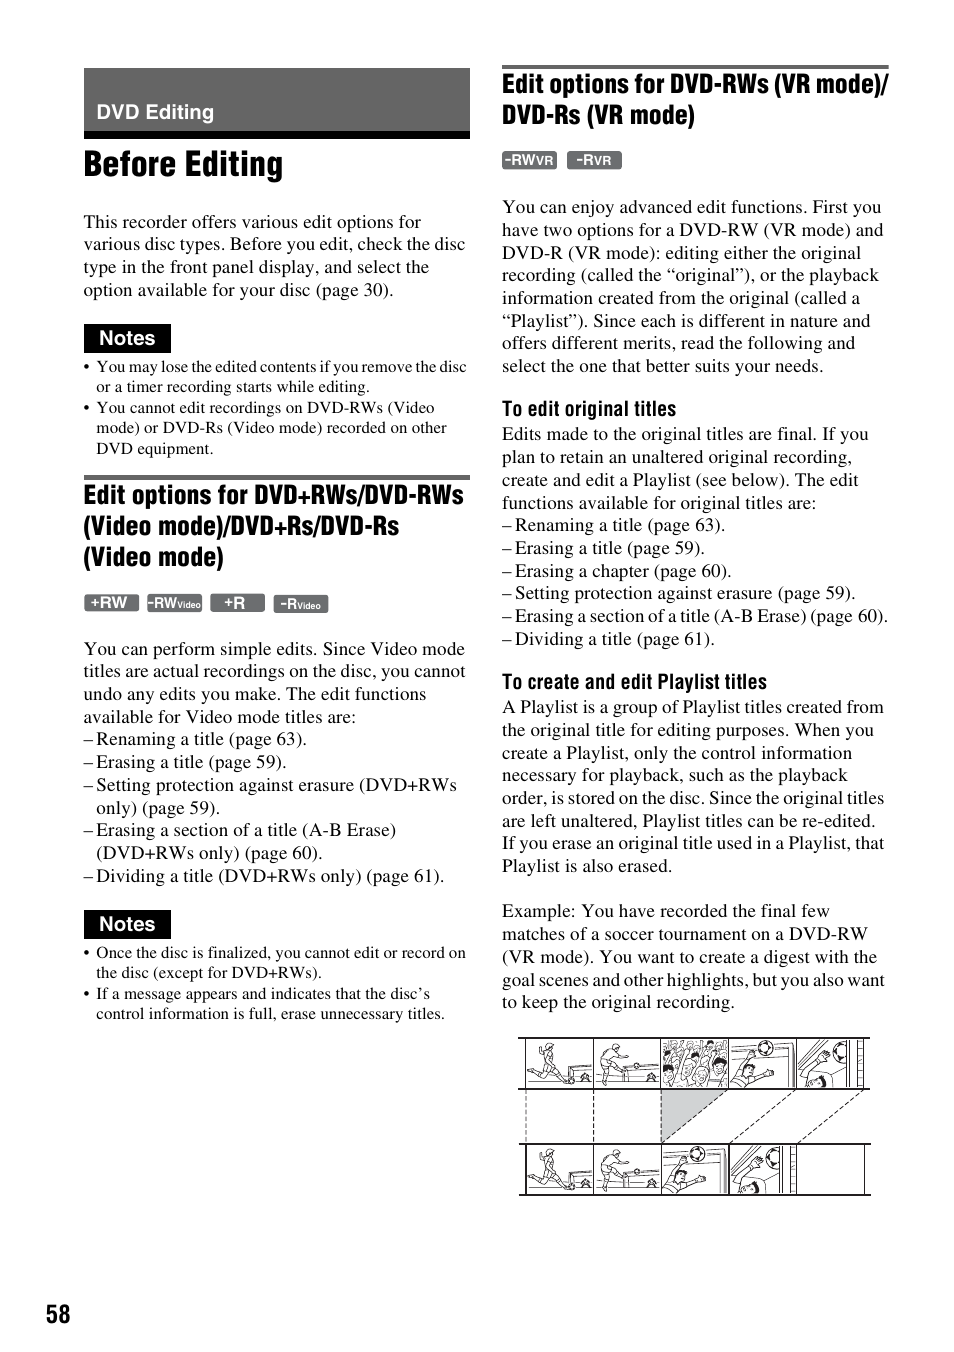 Dvd editing, Before editing | Sony RDR-VX521 User Manual | Page 58 / 132